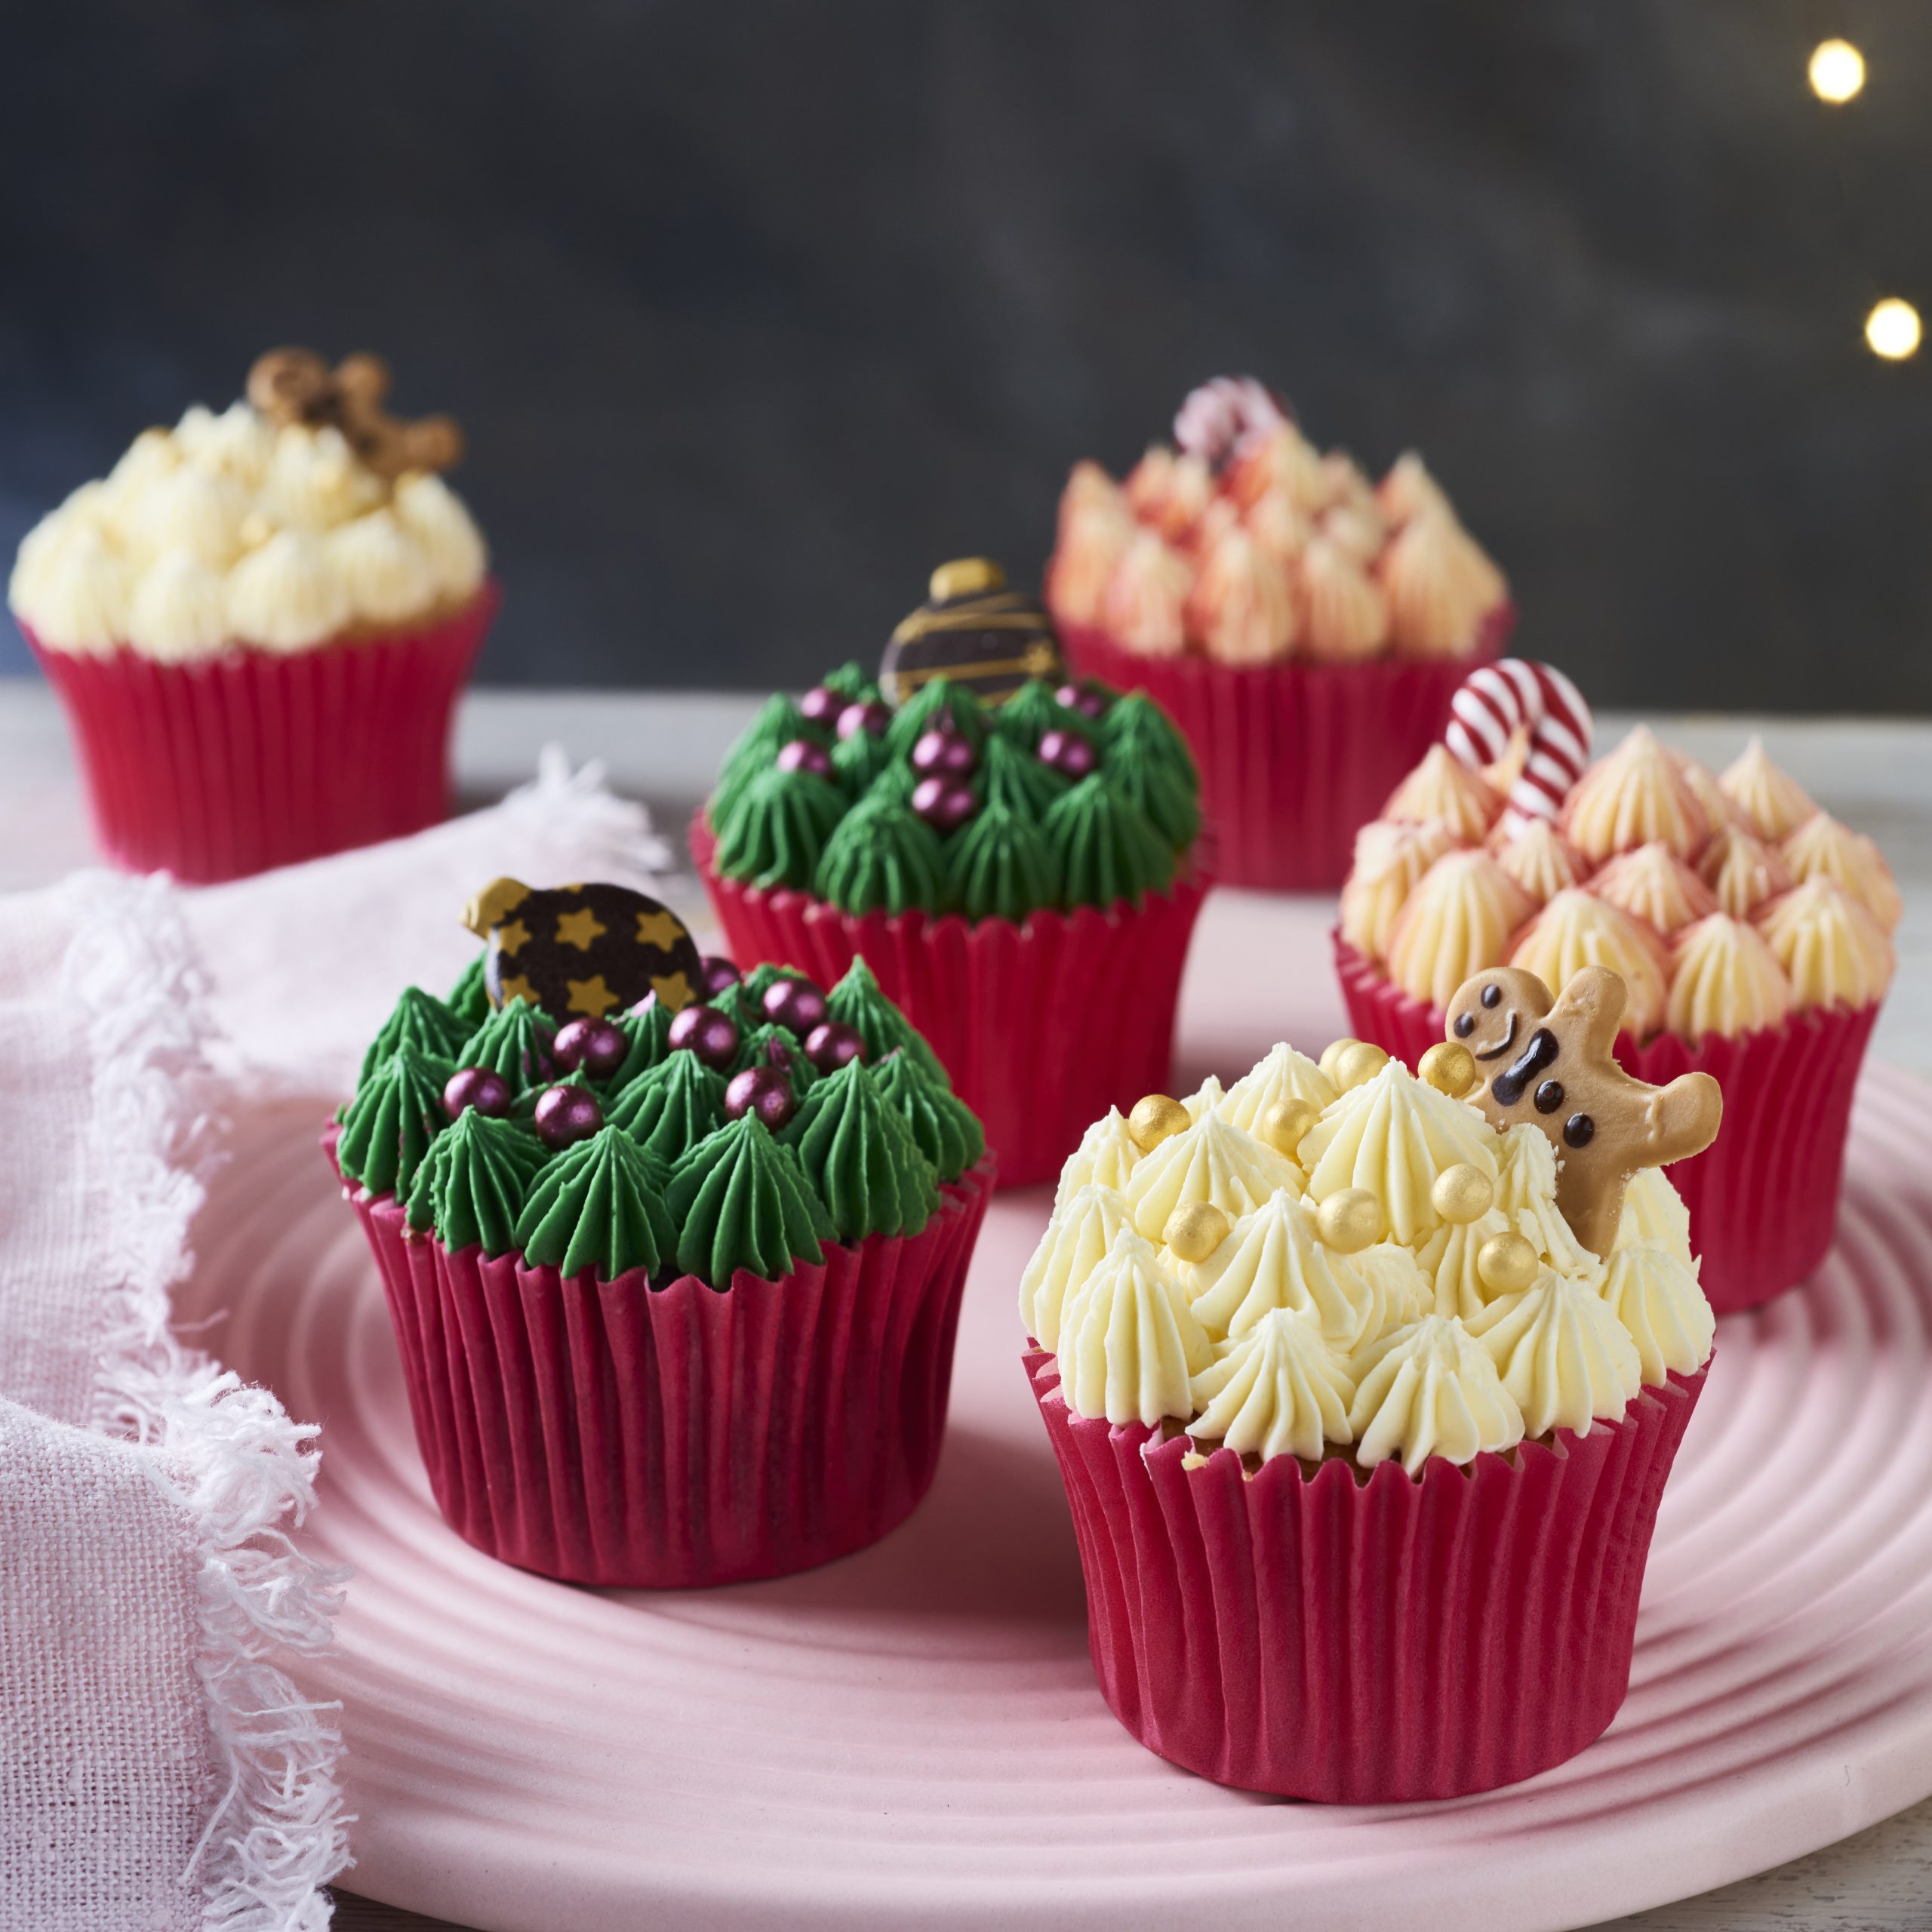 Christmas cupcakes, green, yellow and red with chocolate decorations